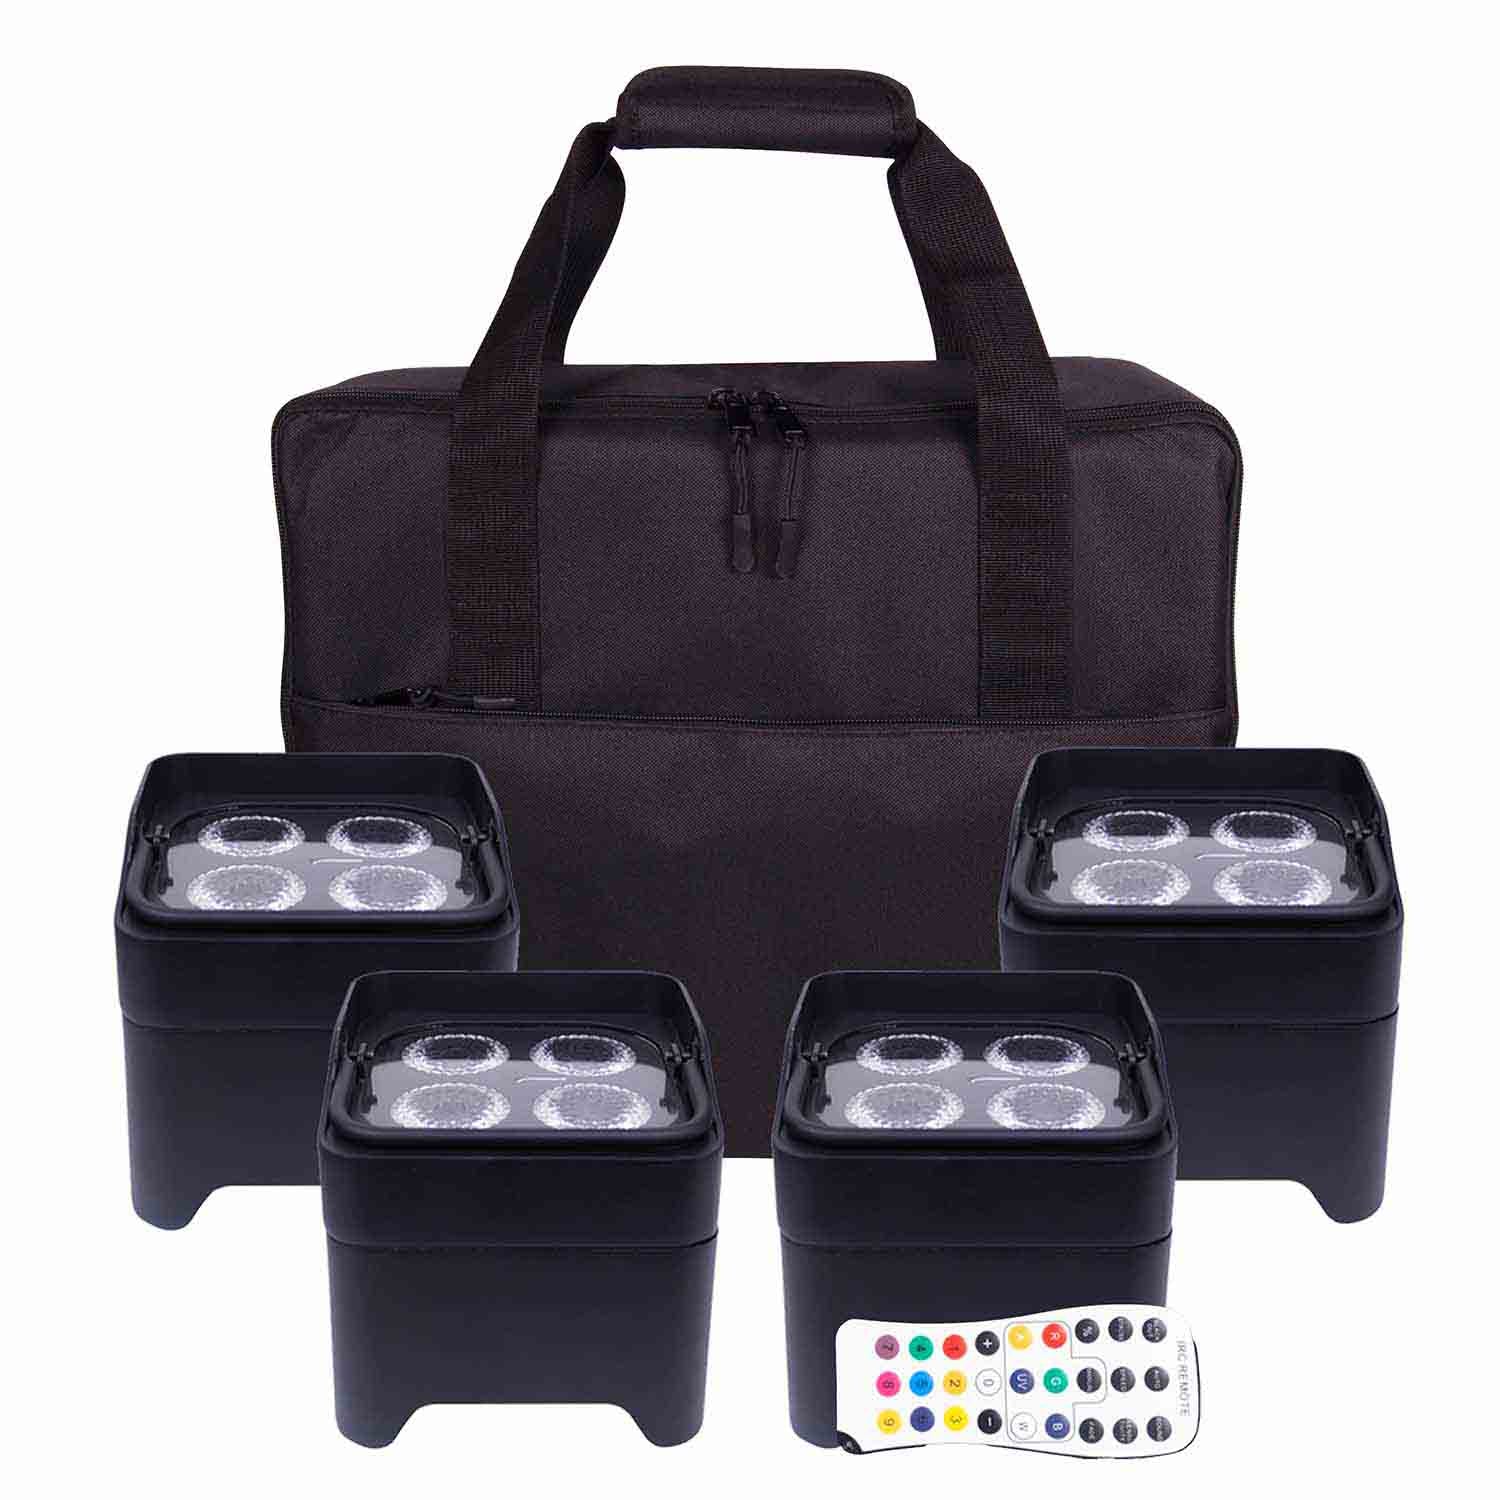 B-Stock: Colorkey CKW-6020 MobilePar Mini Hex 4 Bundle with Carrying Case - 4-Pack - Hollywood DJ